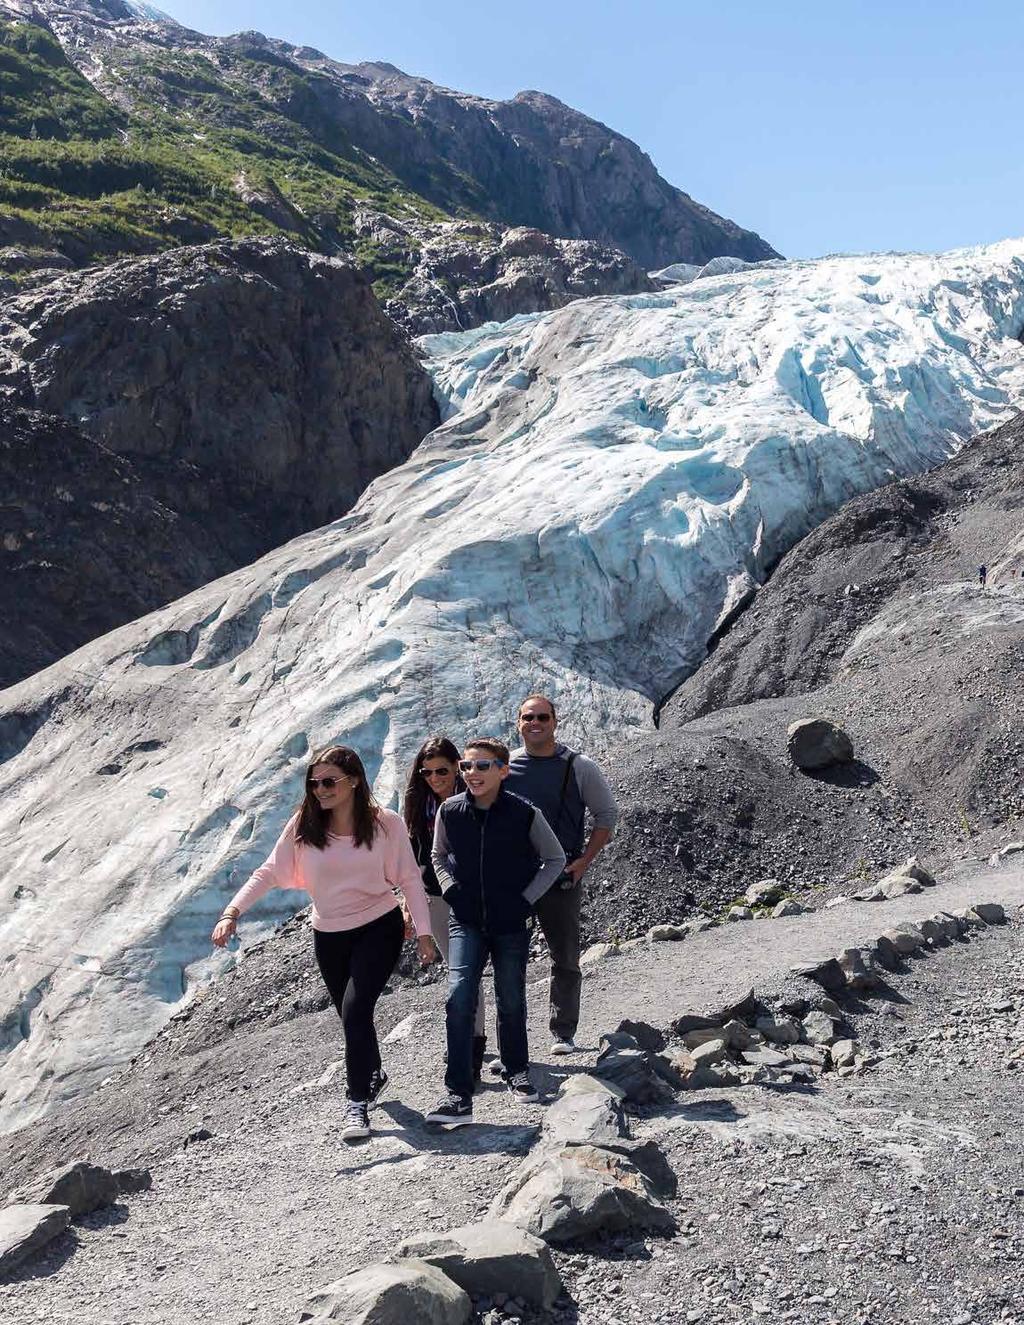 ALASKA 2018 CRUISETOURS OVERVIEW View the charts below to help you select the Cruisetour land package that best fits your individual interests and vacation plans.